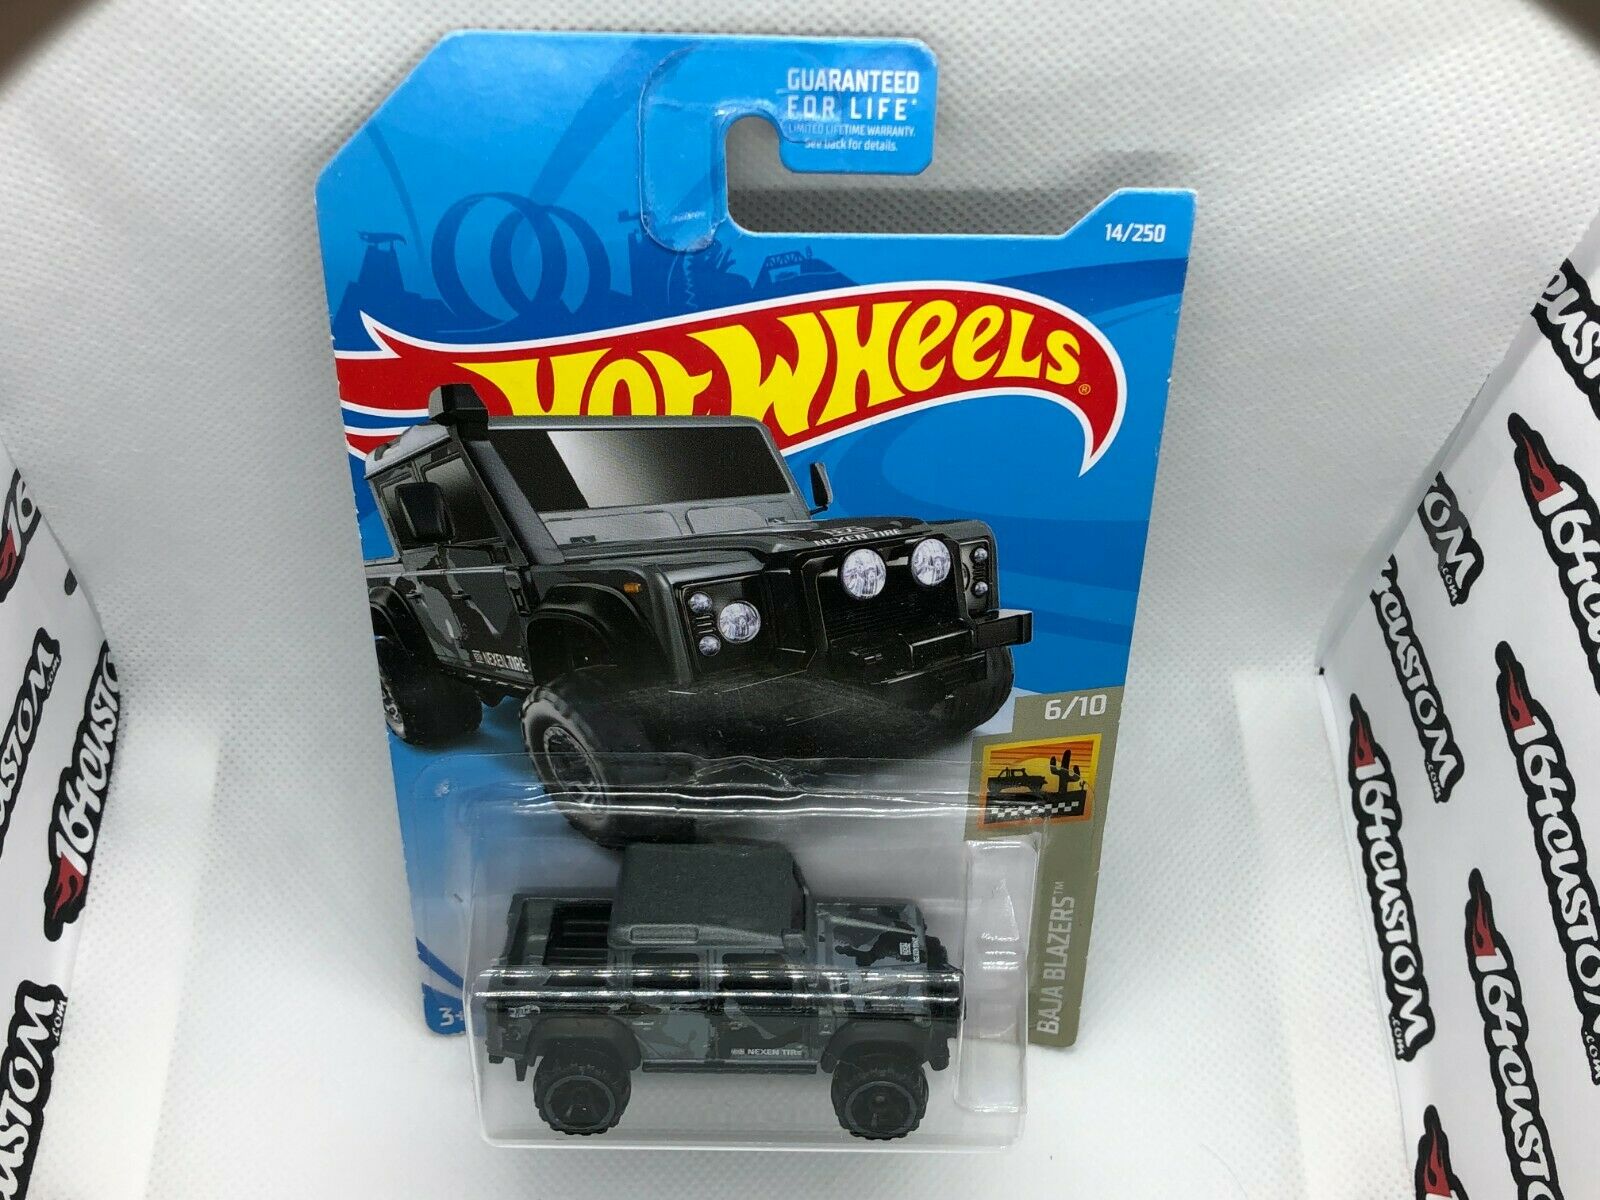 '15 Land Rover Defender Double Cab Hot Wheels